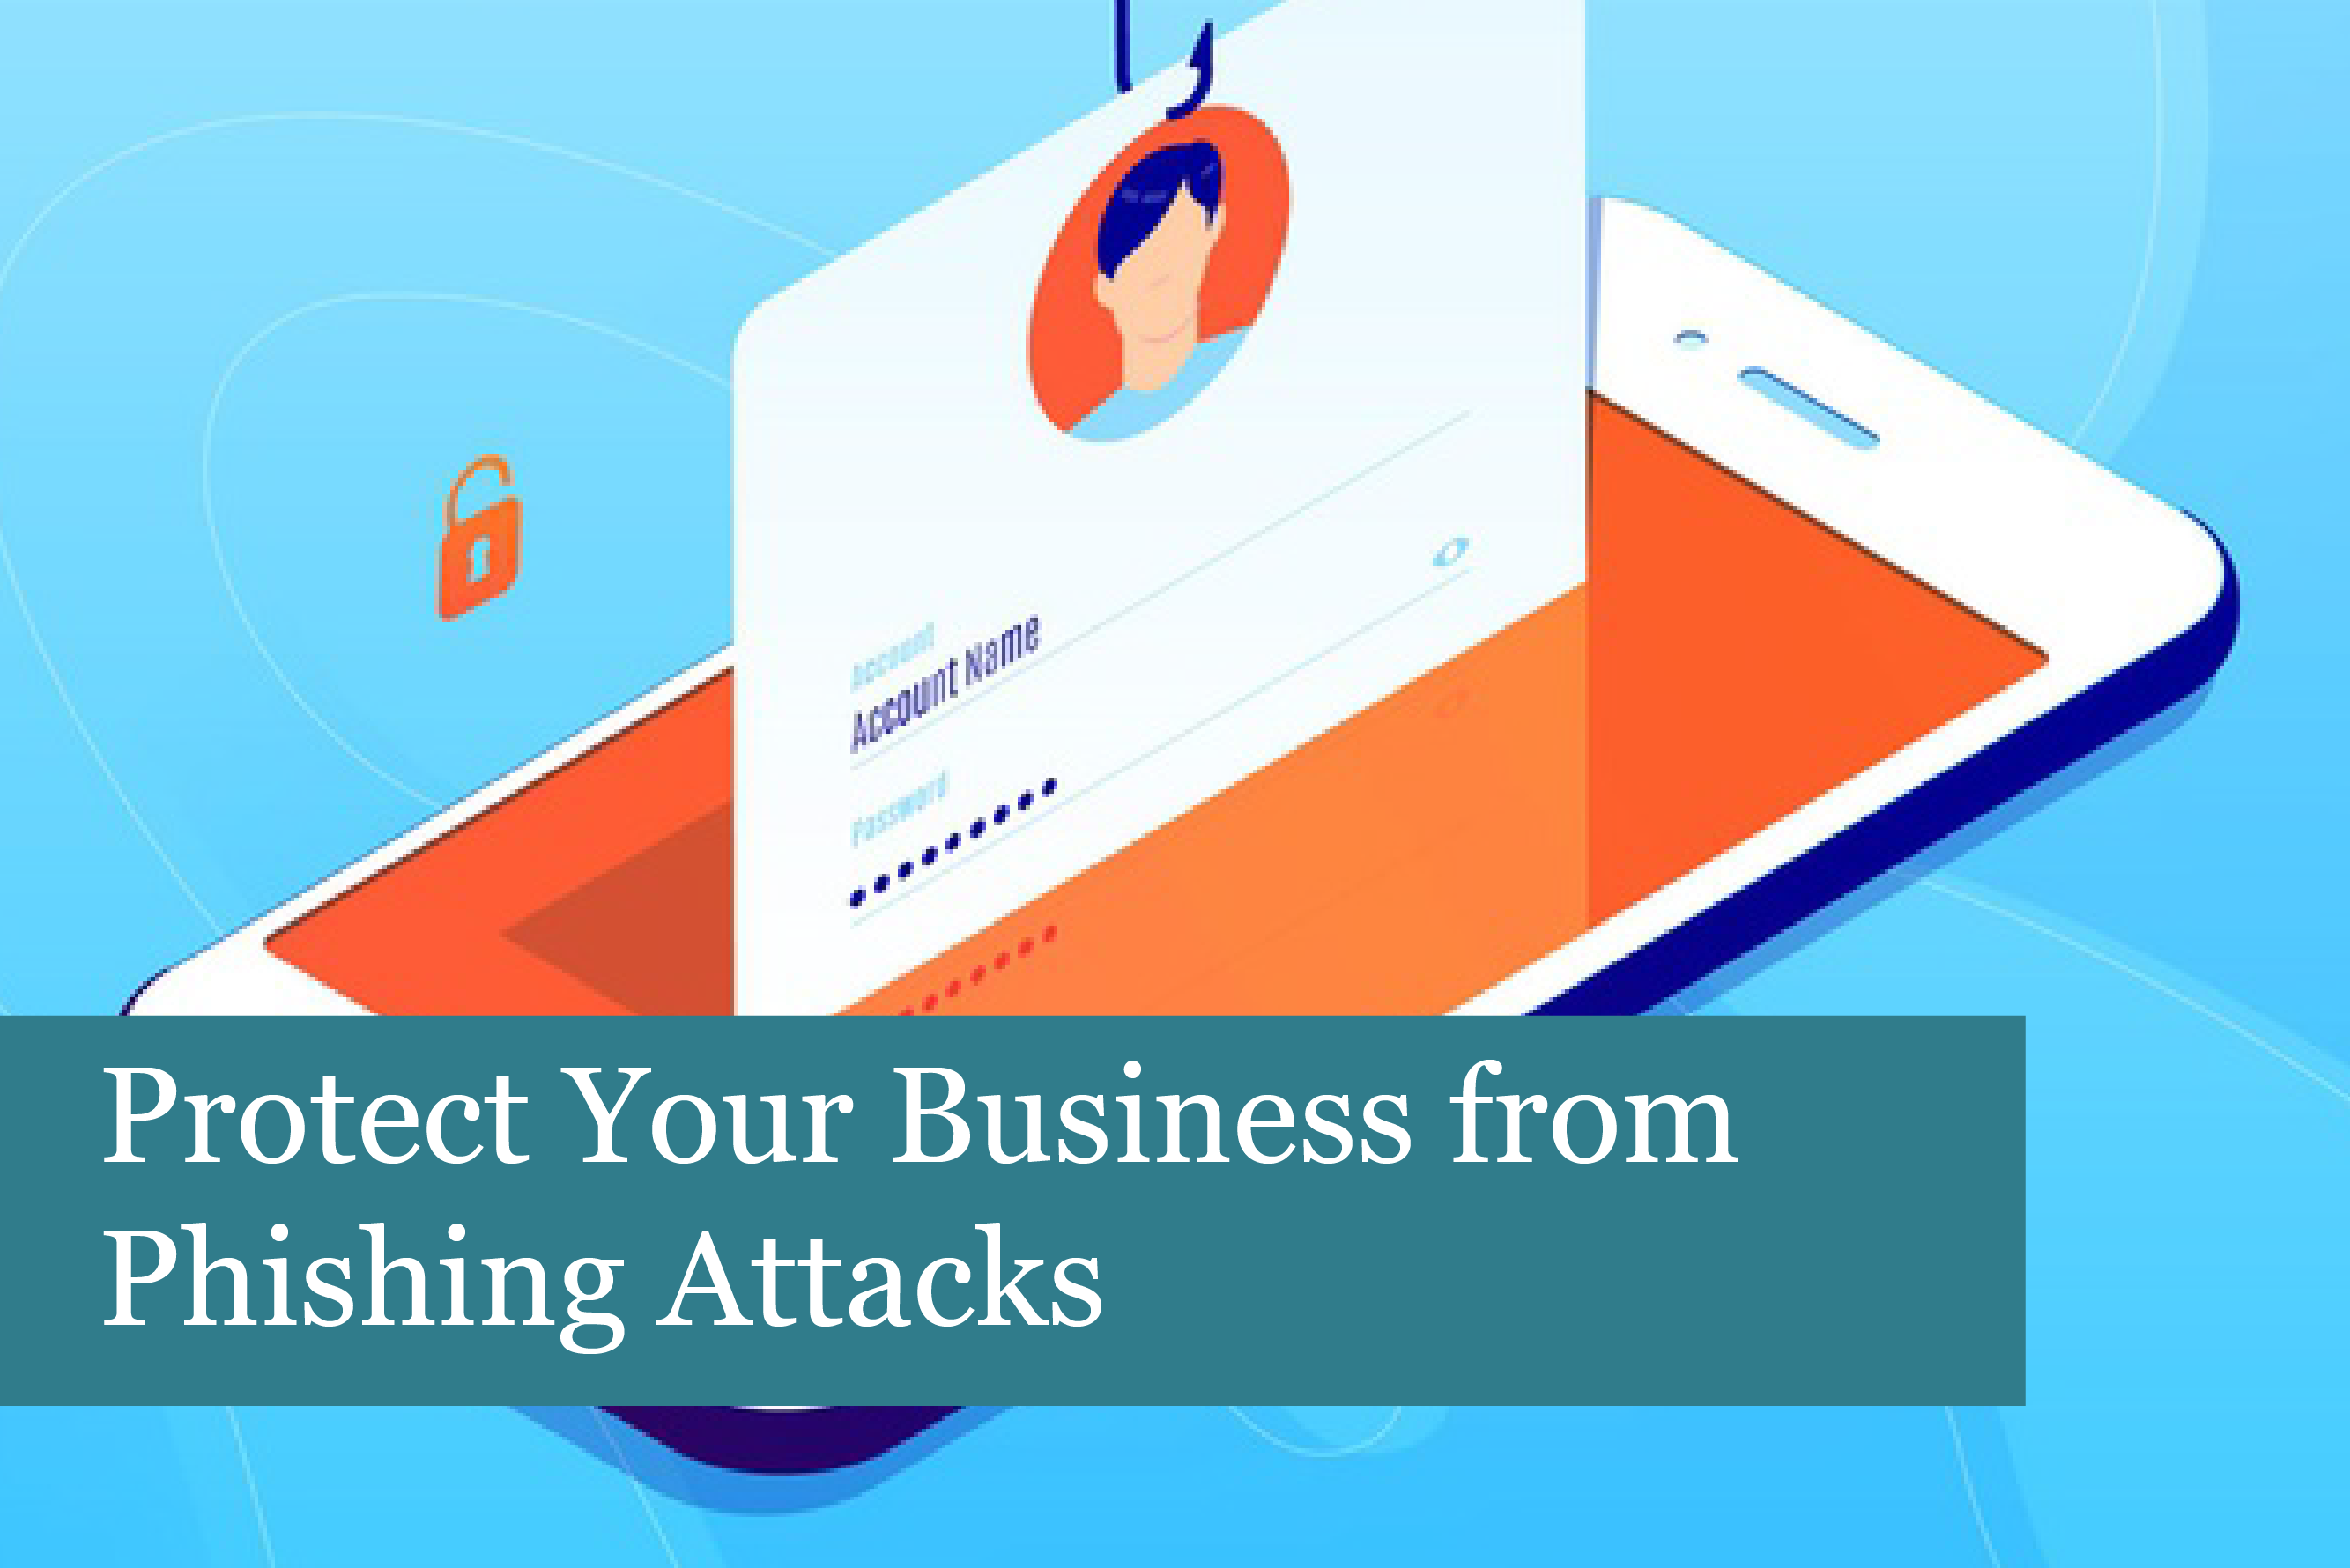 Protect Your Business from Phishing Attacks